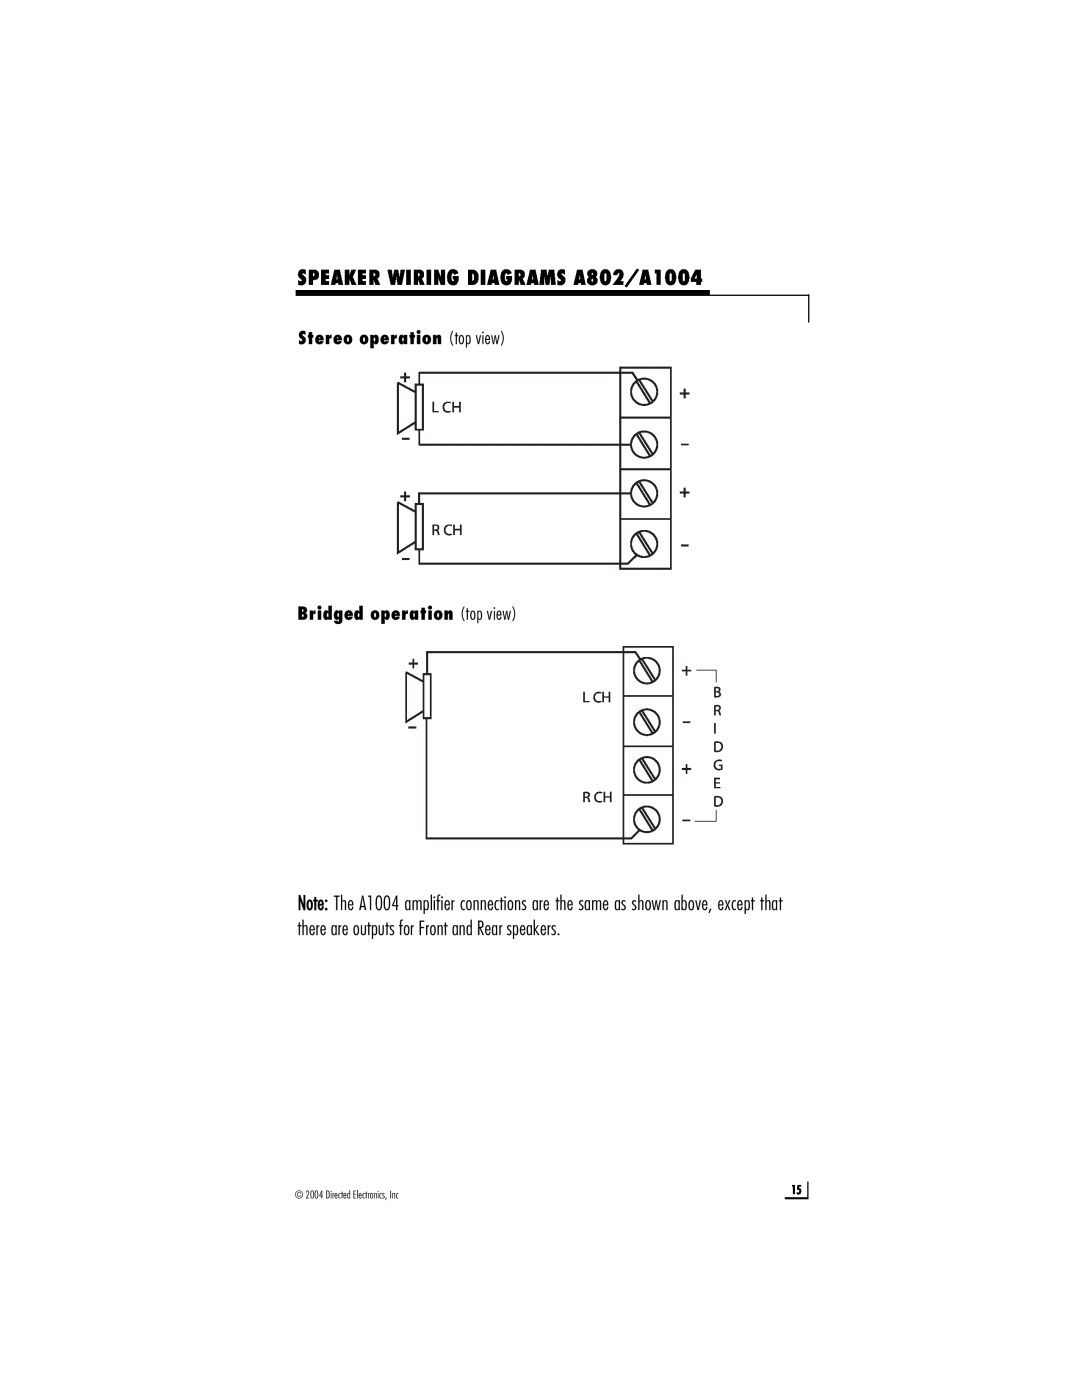 Directed Electronics D2205 SPEAKER WIRING DIAGRAMS A802/A1004, Stereo operation top view, Bridged operation top view 